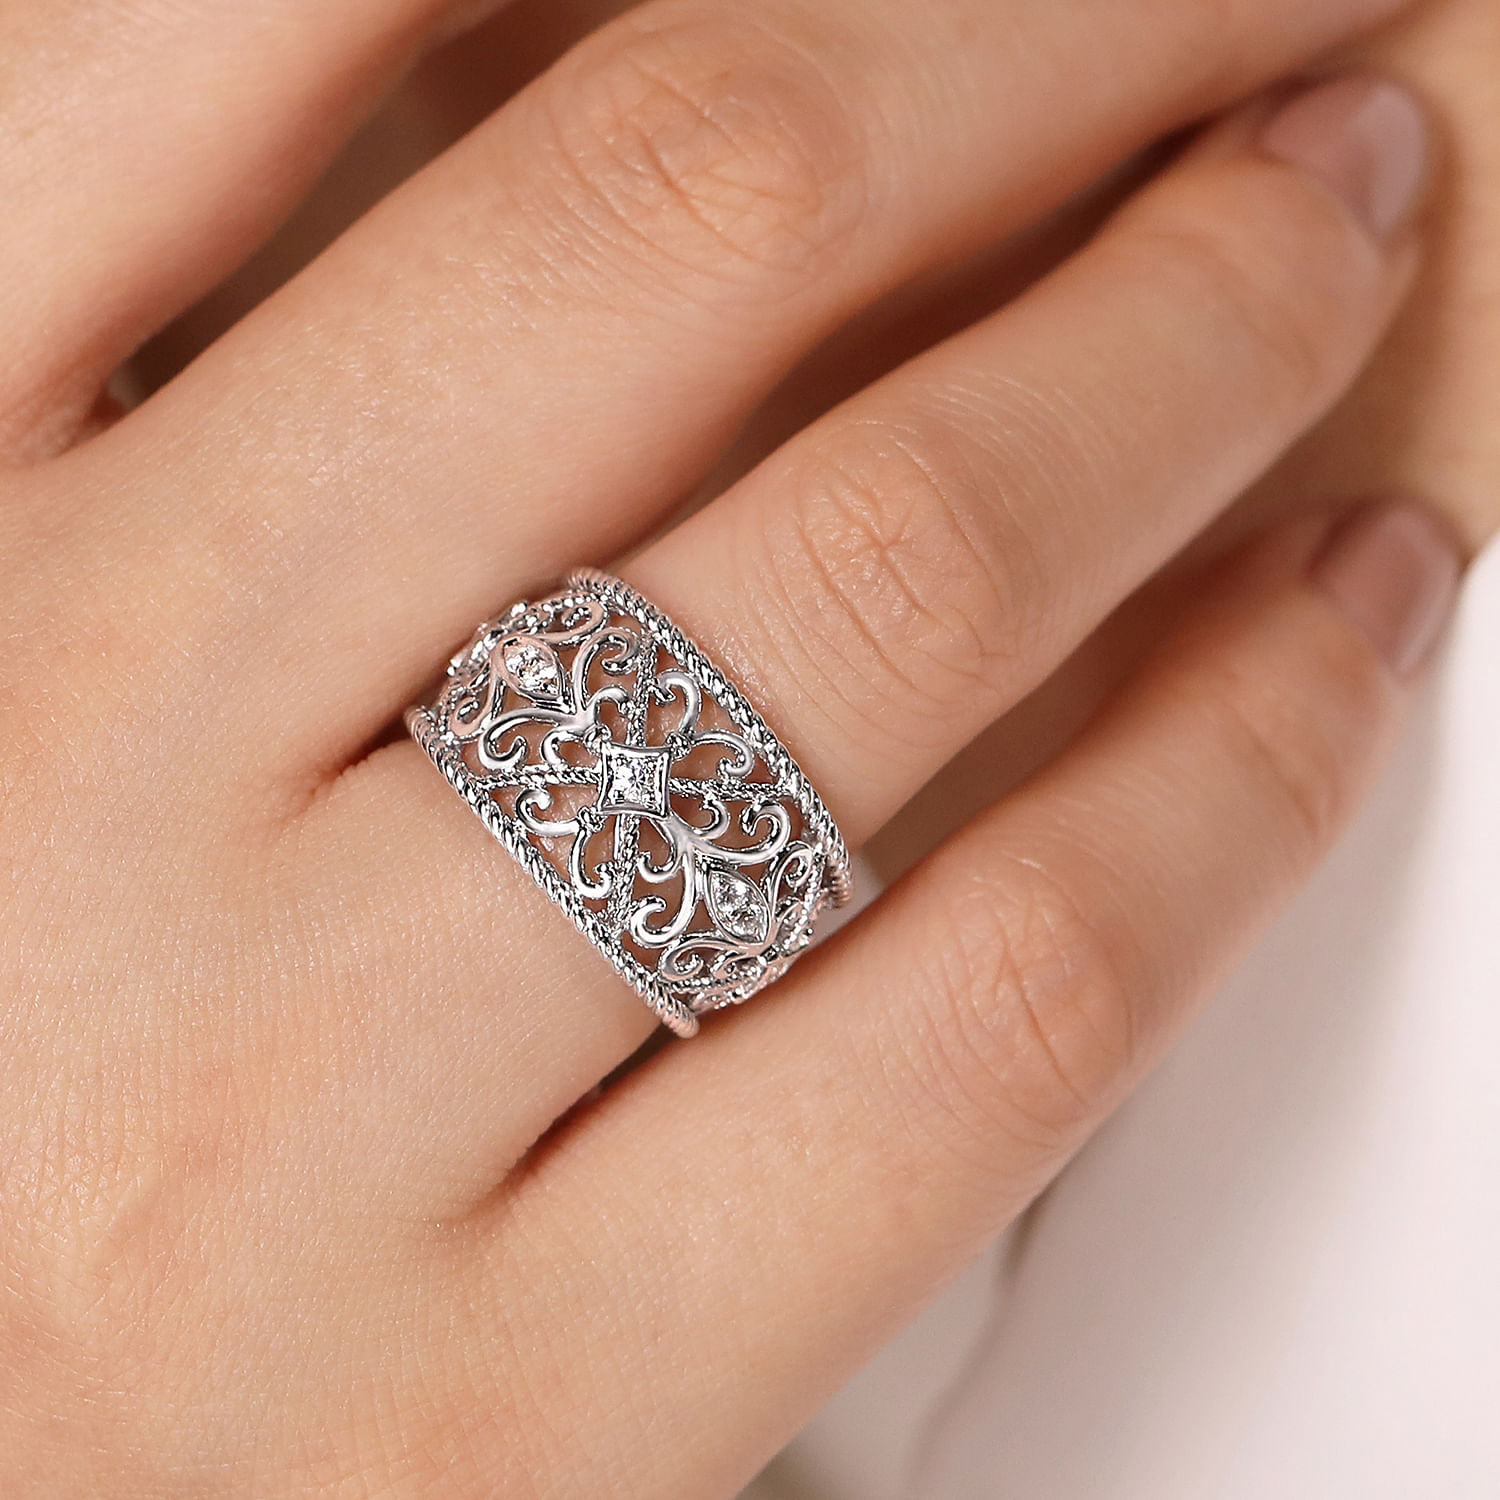 Sterling Silver Floral Openwork White Sapphire Ring